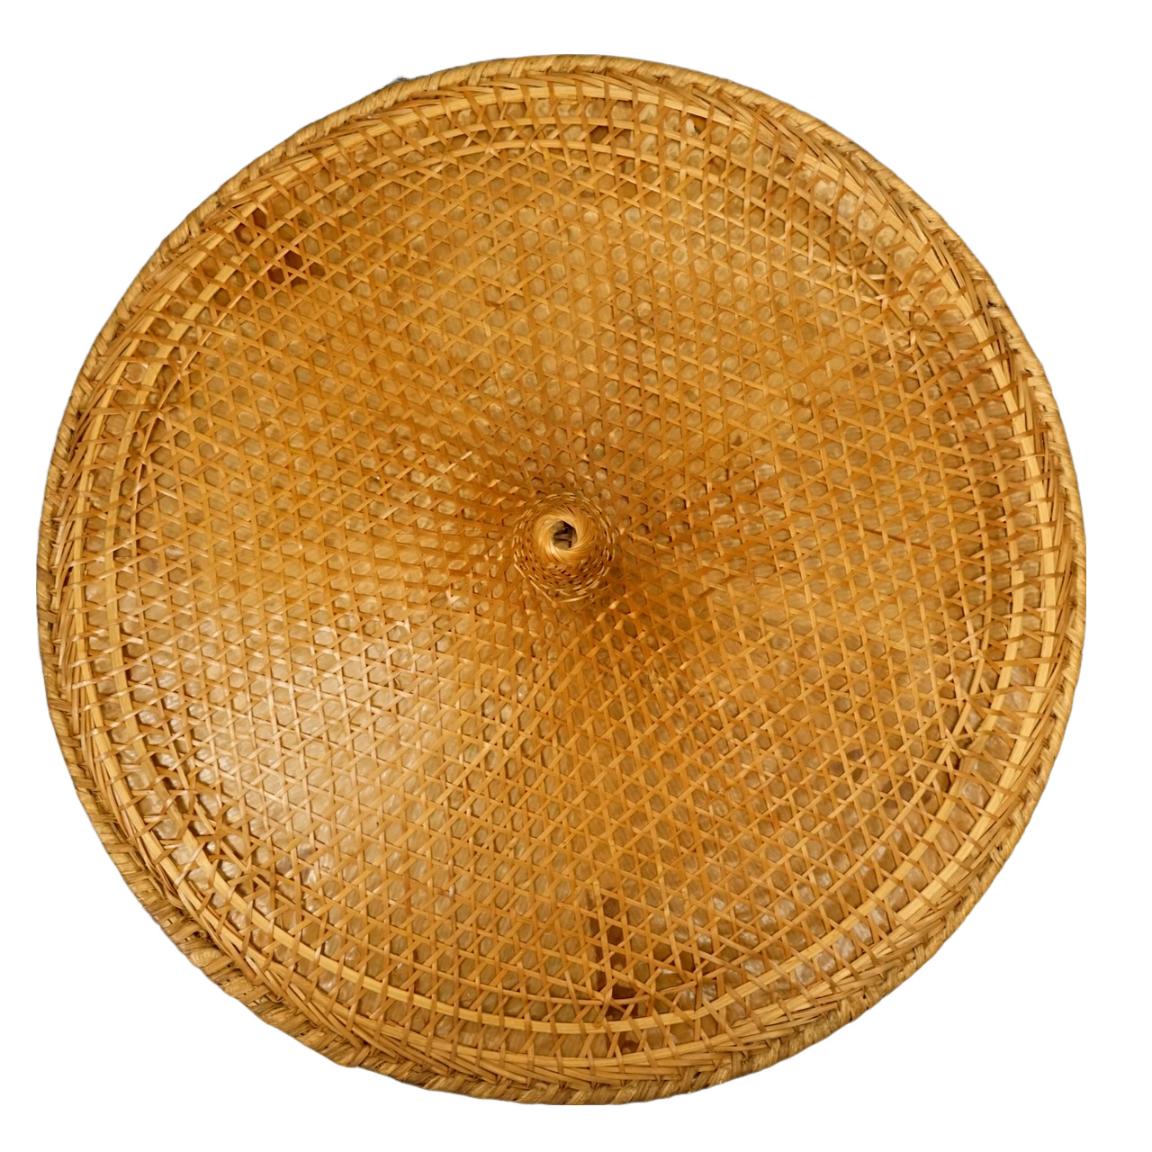 An original Asian wicker conical coolie hat, with an under chin string. Measuring diameter 46 cm / 18.1 inches. It is in very good condition.

The coolie hat is very well made. Circa 1940s. A rare find.